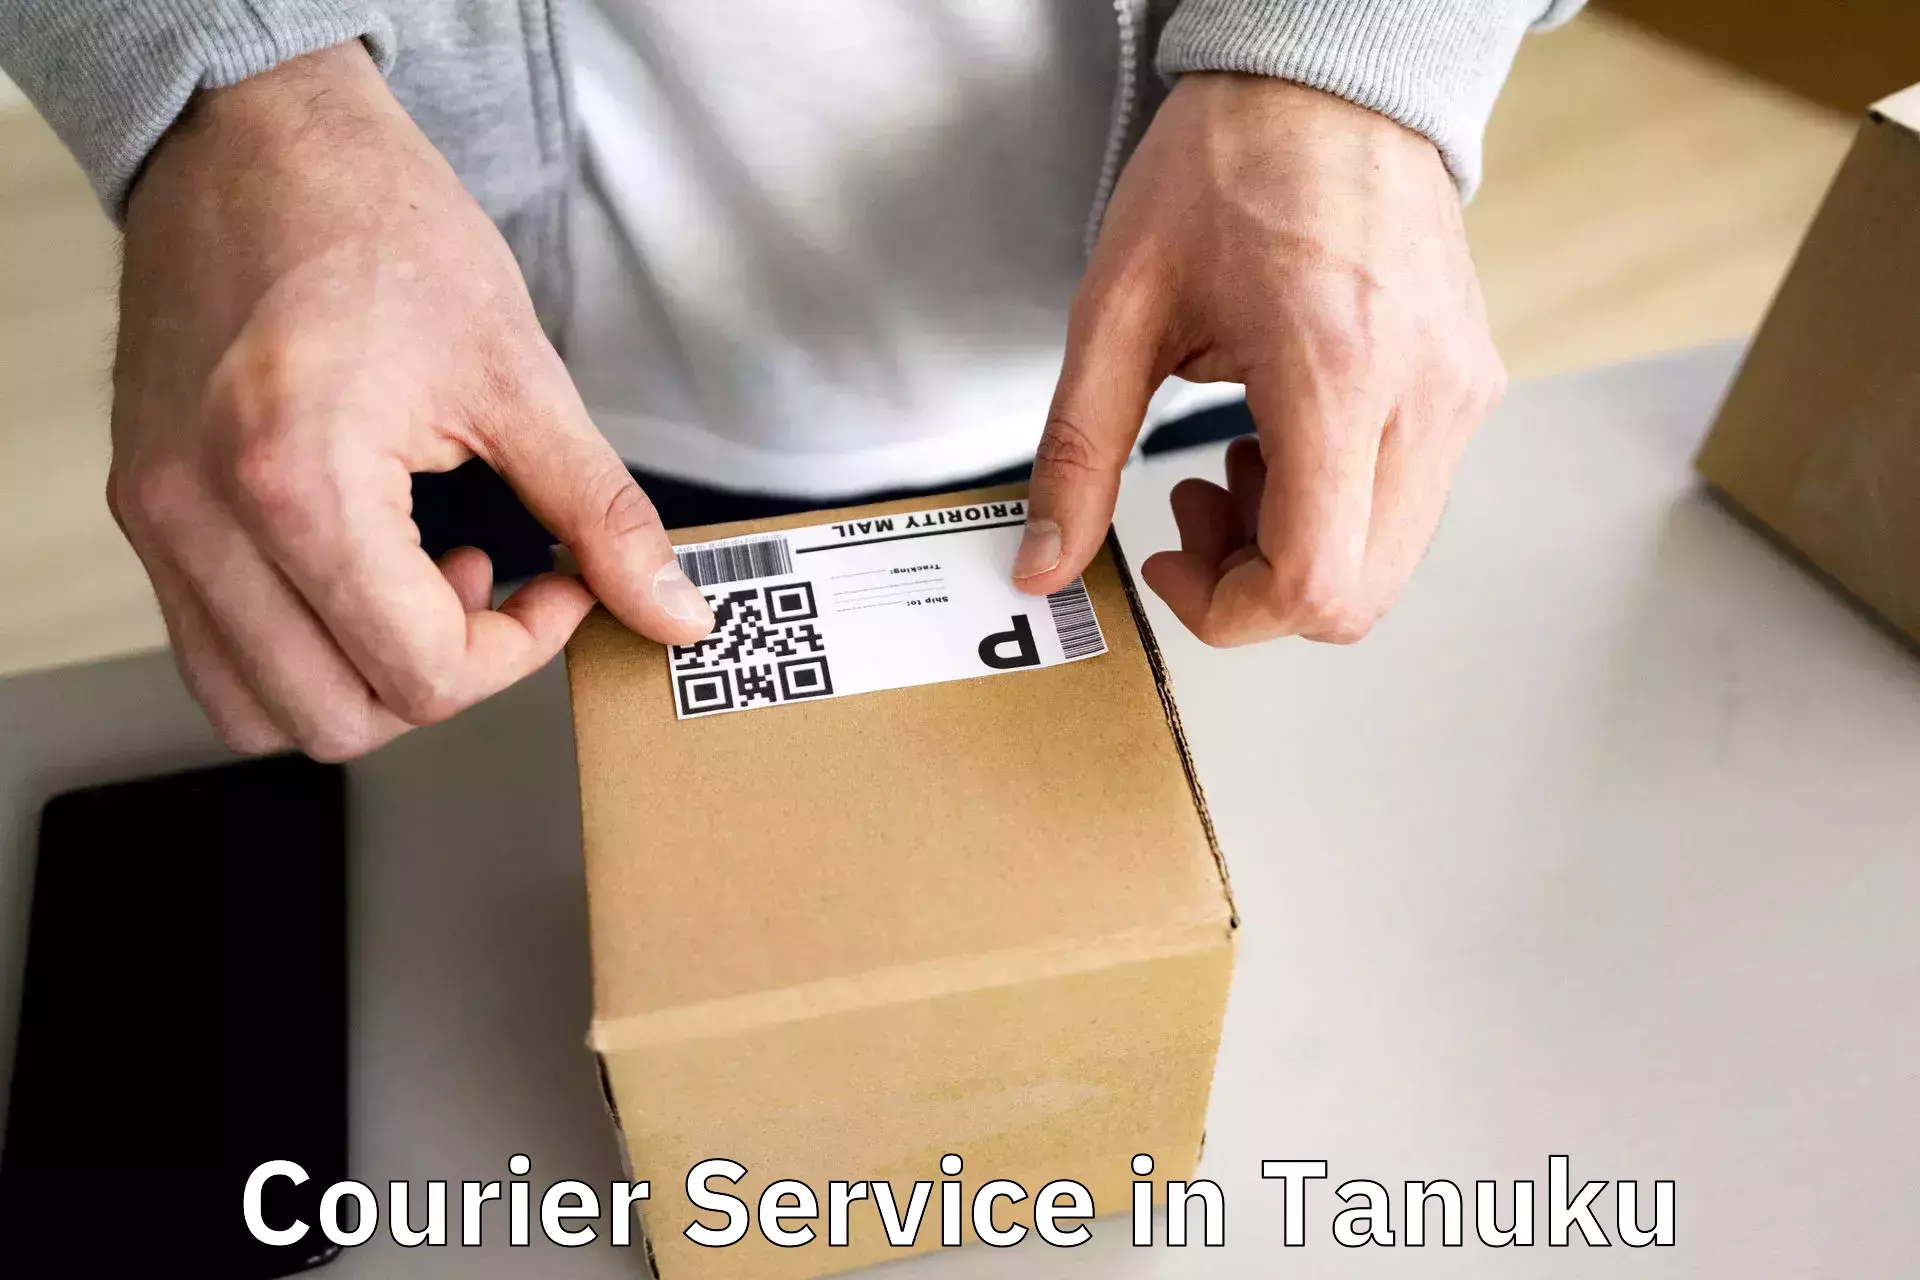 Quality courier partnerships in Tanuku